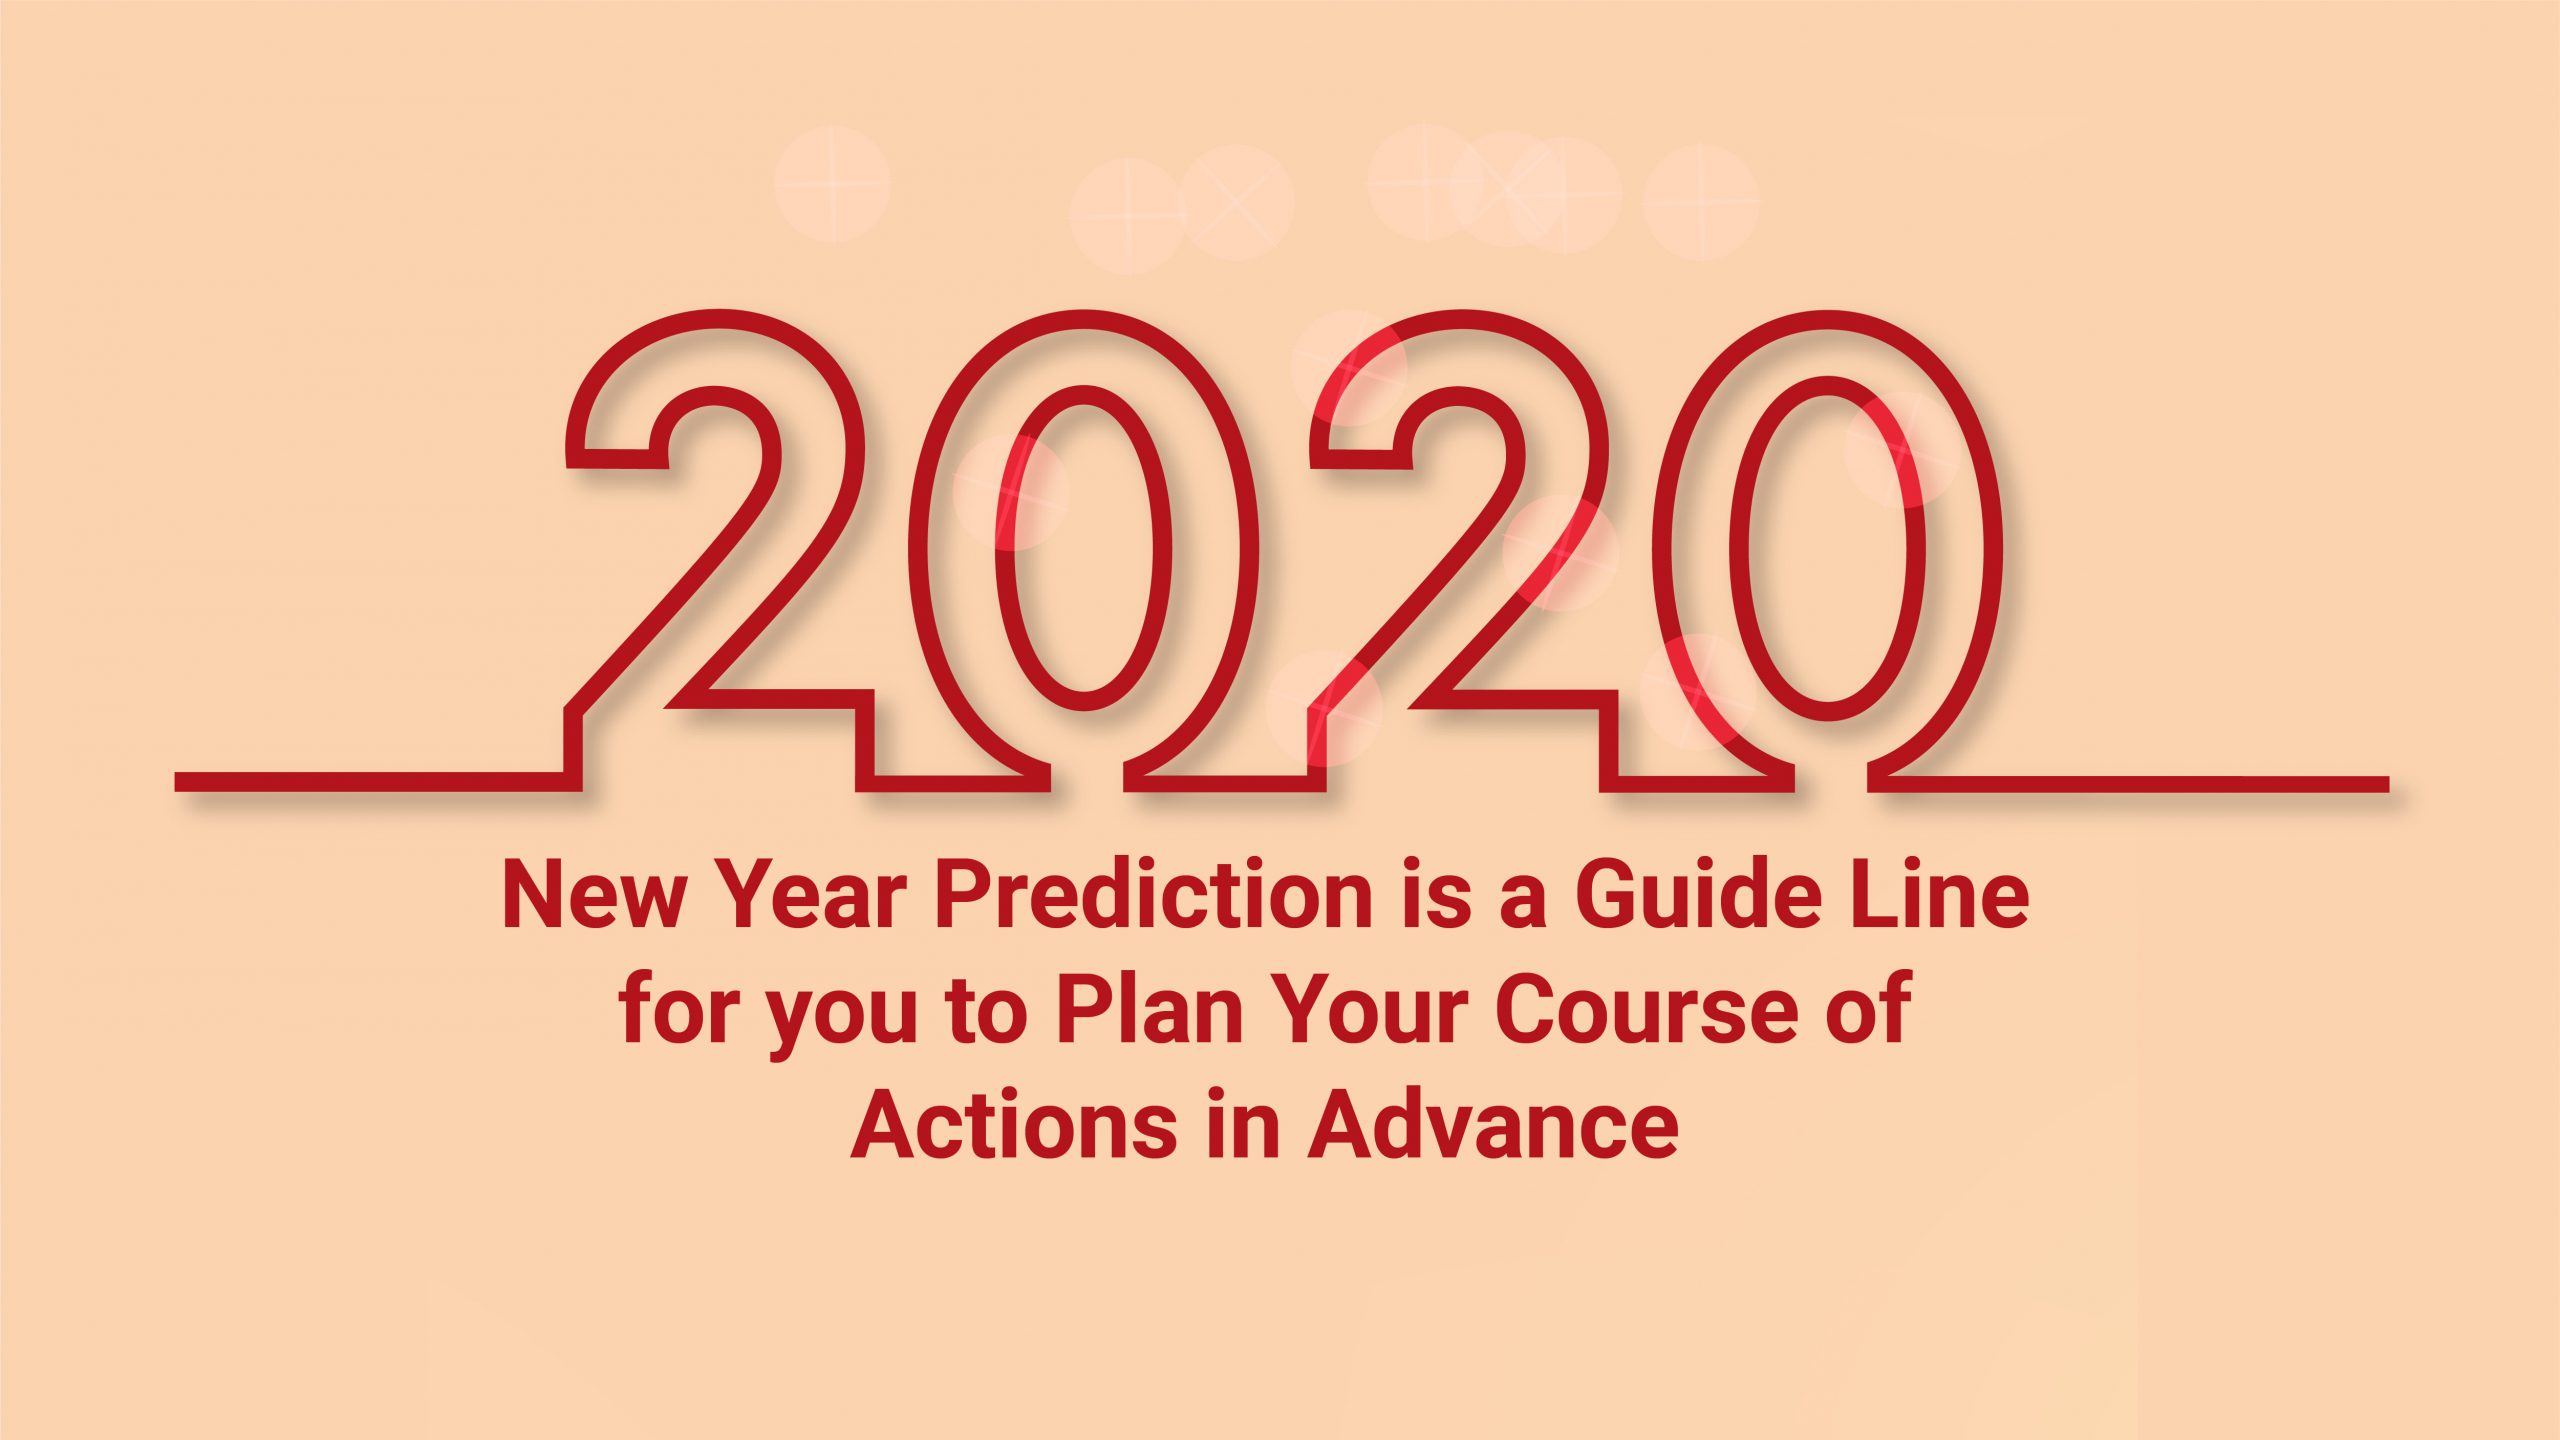 New Year Prediction is a guide line for you to plan your course of